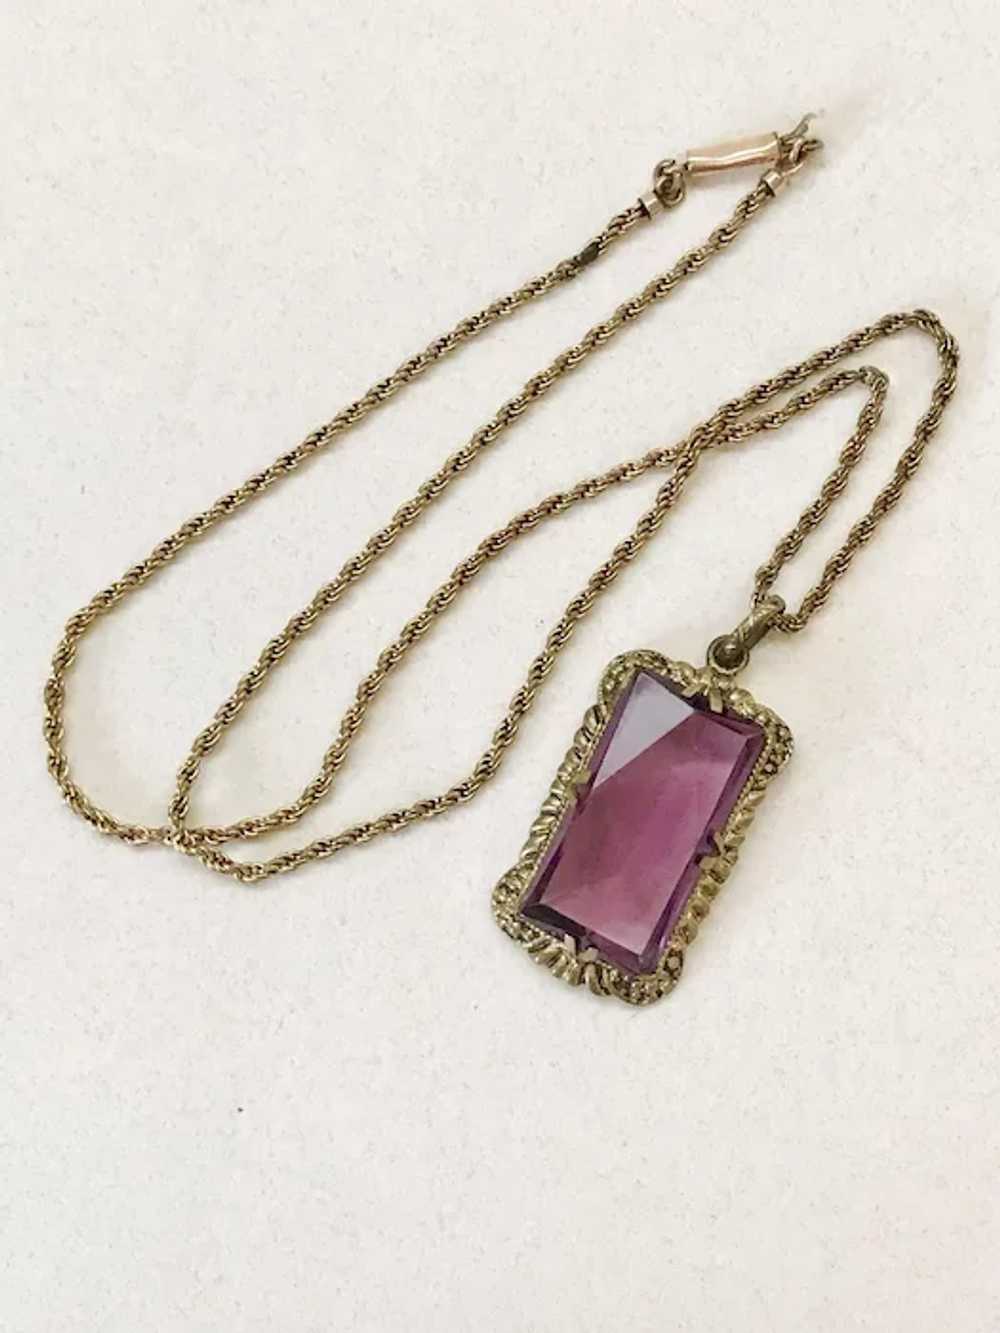 Victorian Gold Filled Faux Amethyst Necklace - image 2